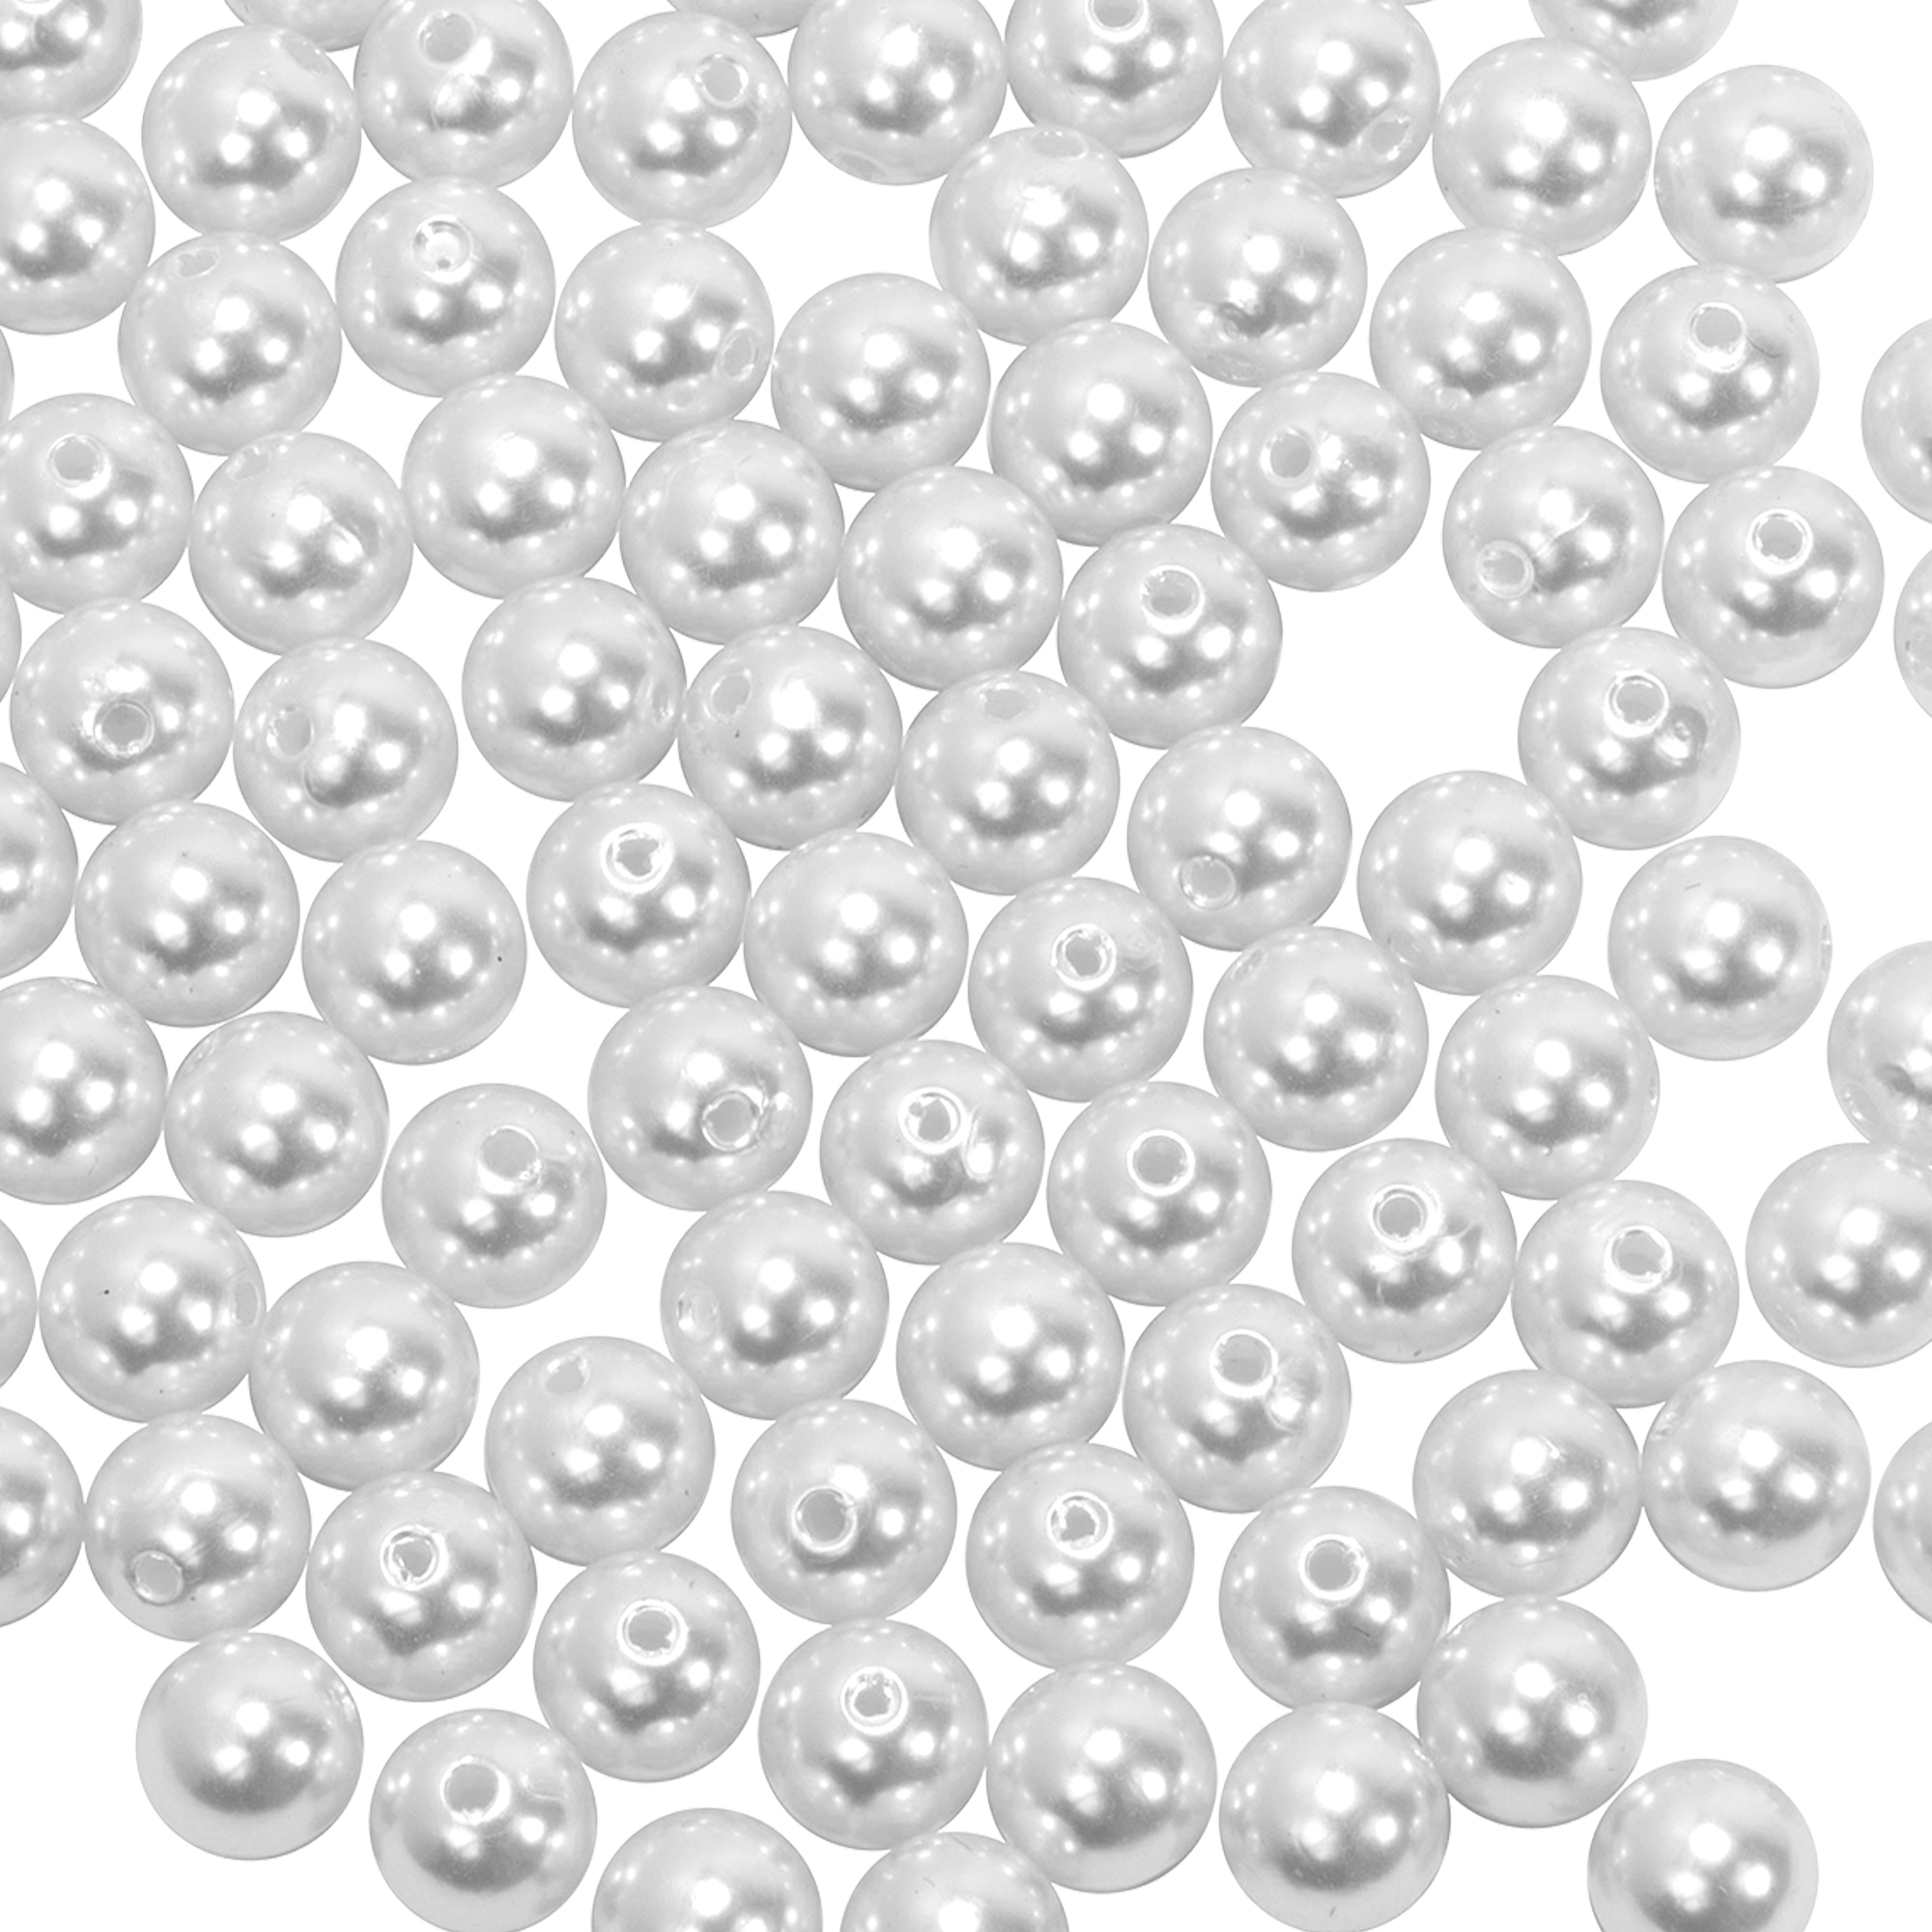 20mm Craft Pearl Beads With Hole 454g/Bag - White